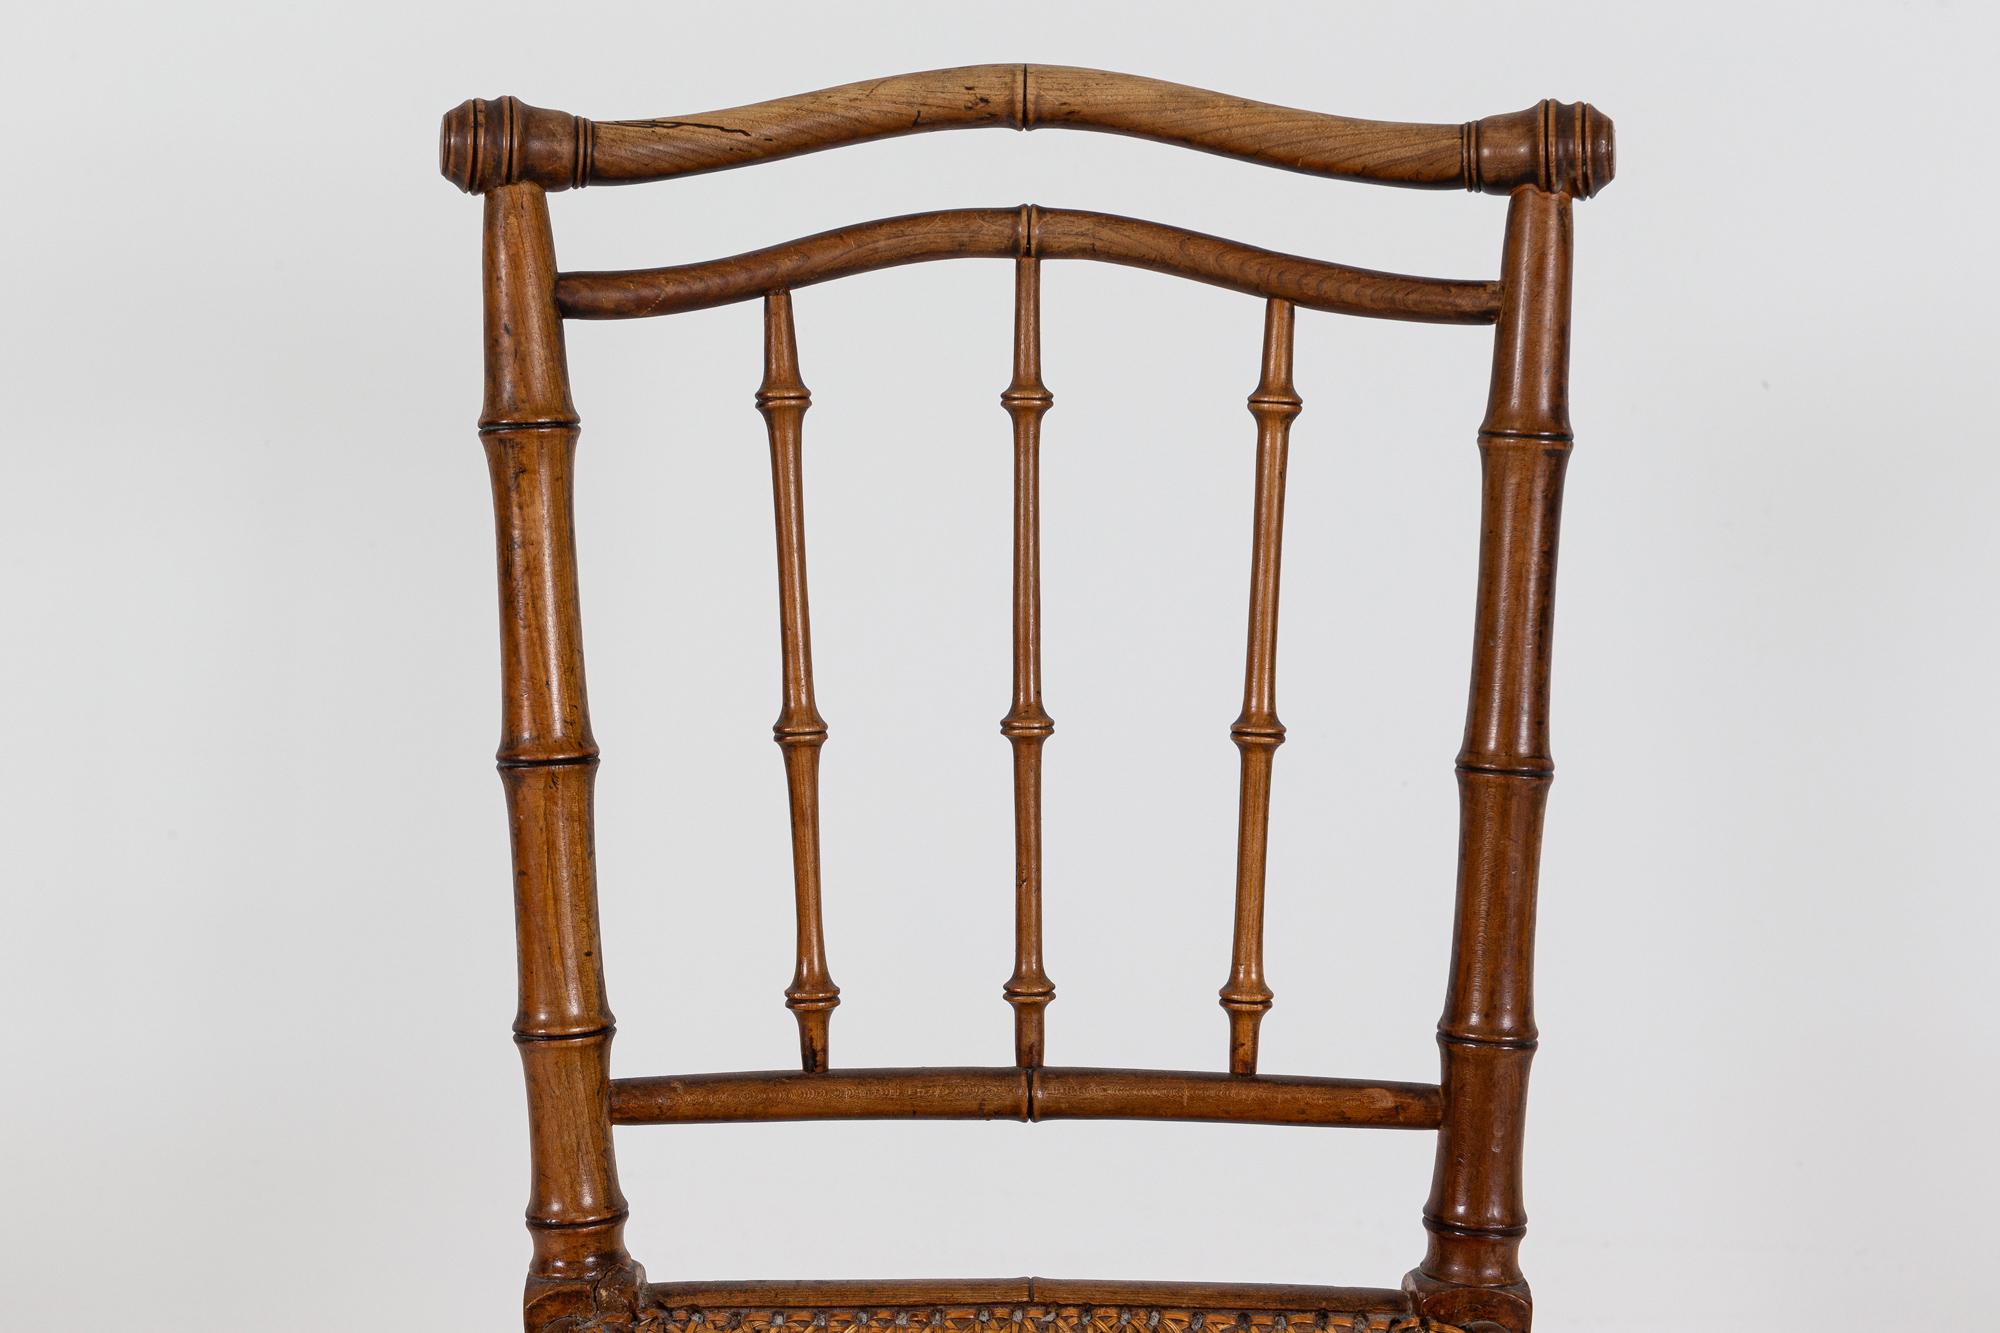 Circa 1840.

19thC set of 4 French faux bamboo rattan beech chairs

Excellent colour and patination

Sourced from the South of France

Measures: W 42 x D 42 x H 85 cm
Seat height 45 cm.

 